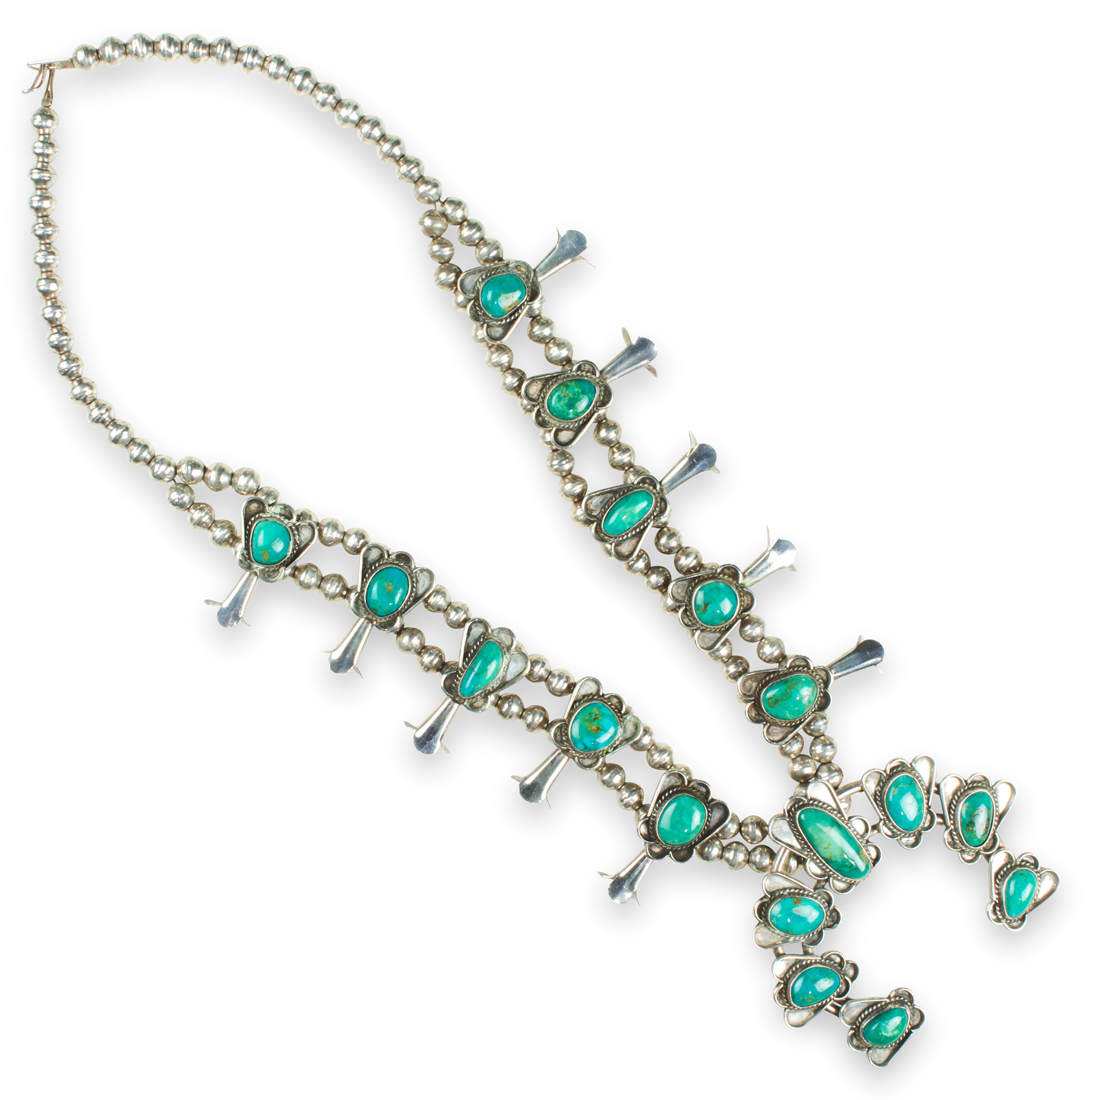 A TURQUOISE AND SILVER NECKLACE 3a286d